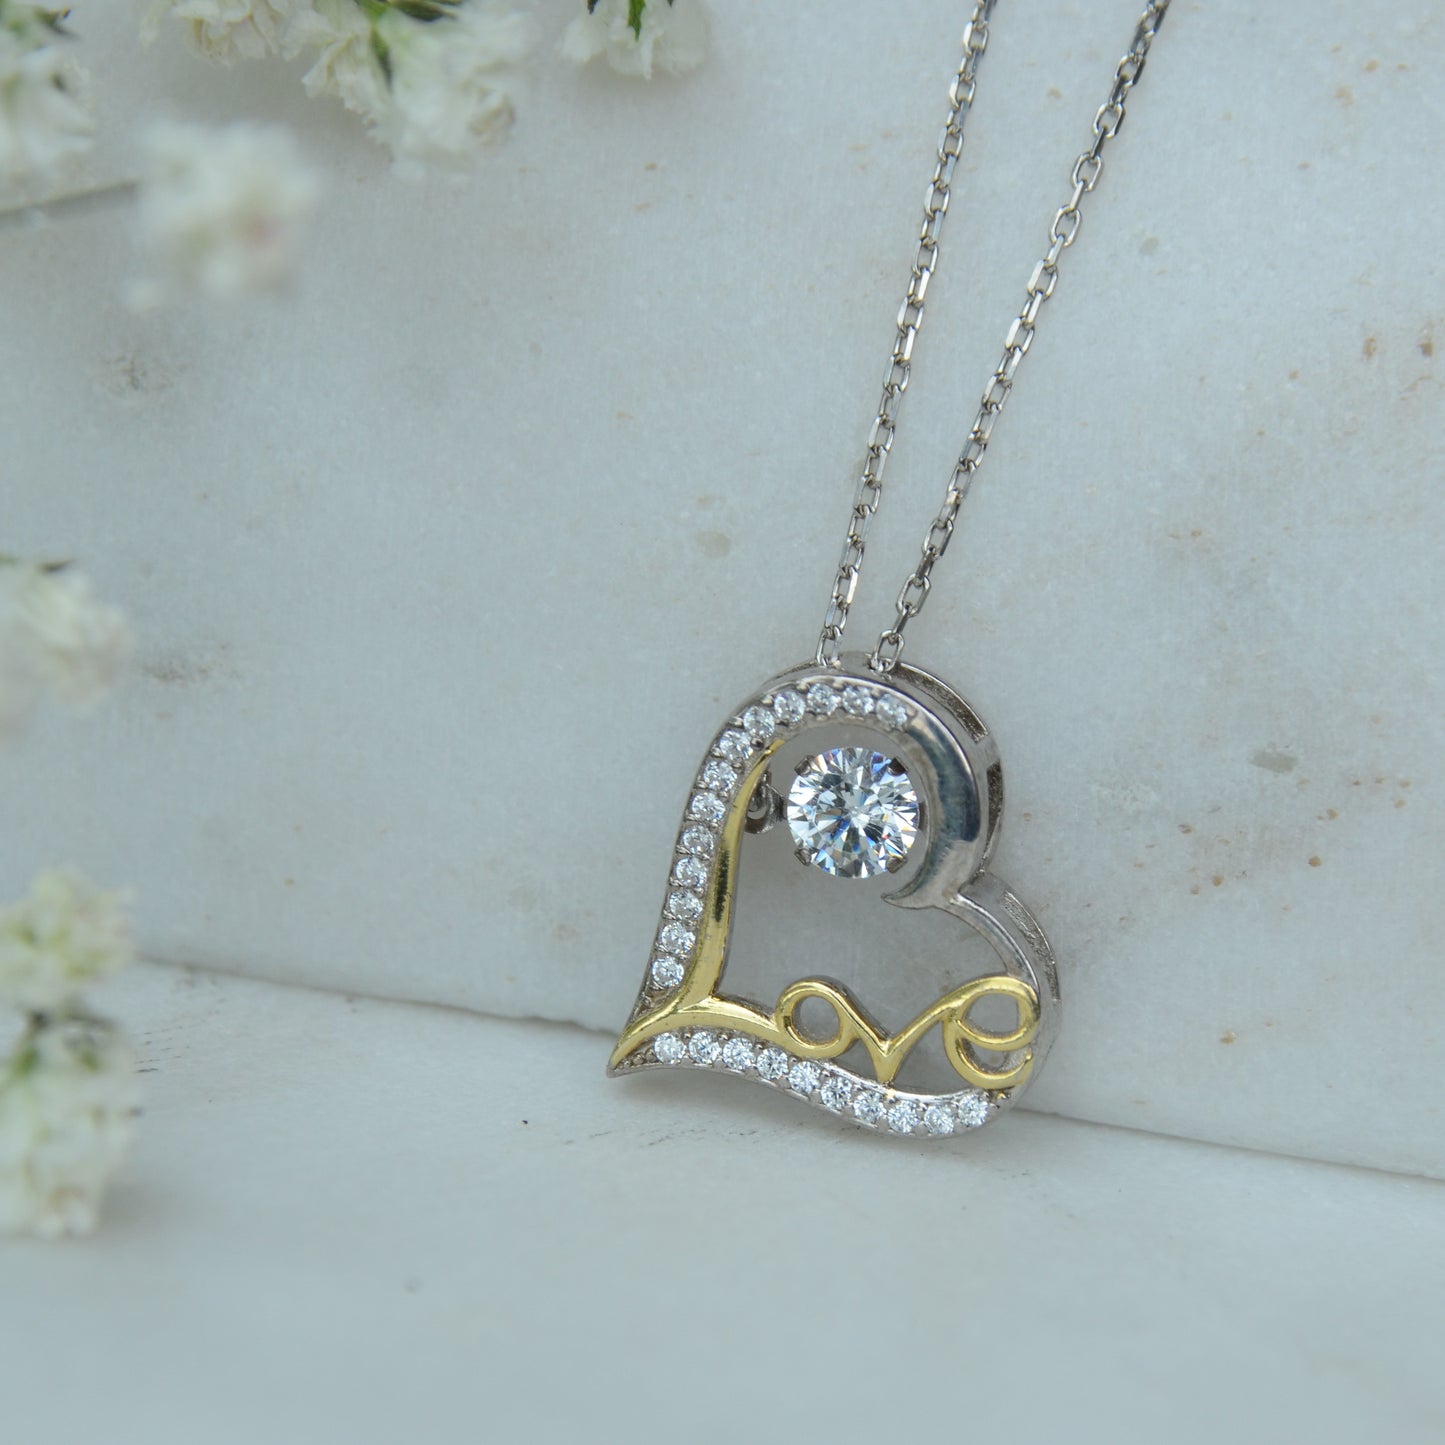 Daughter Gift - Love Heart Necklace